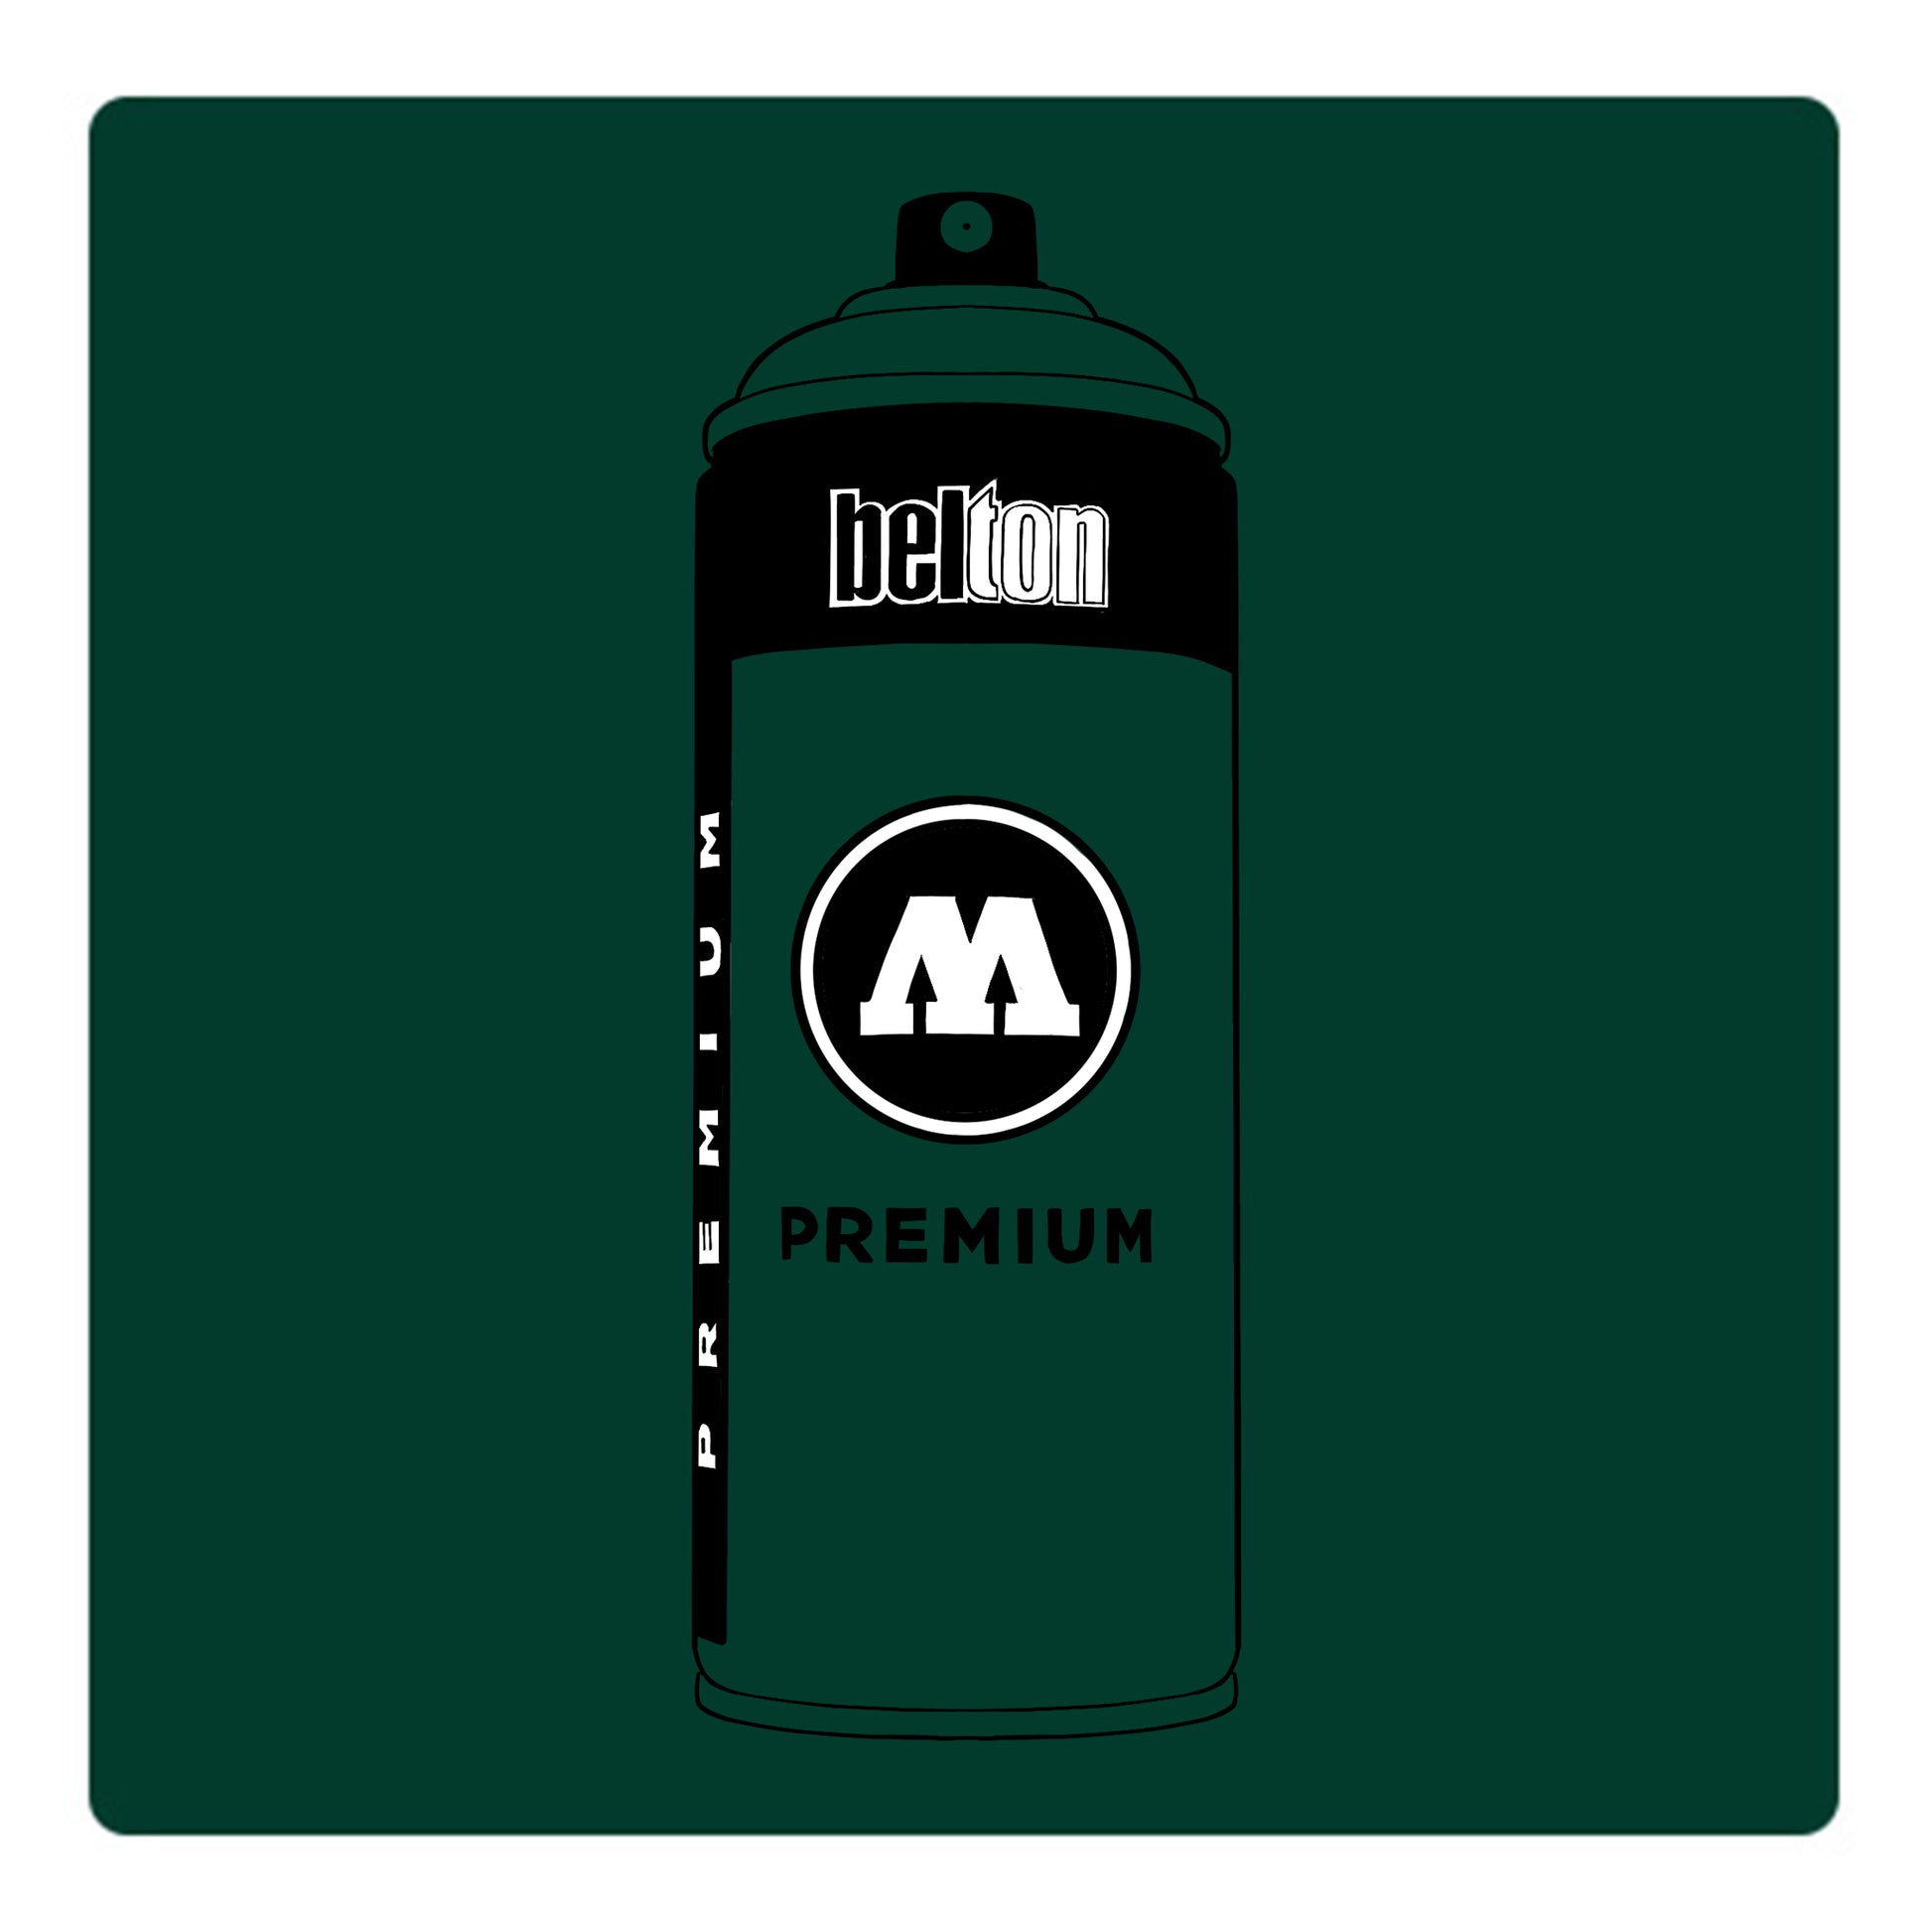 A black outline drawing of a dark green spray paint can with the words "belton","premium" and the letter"M" written on the face in black and white font. The background is a color swatch of the same dark green with a white border